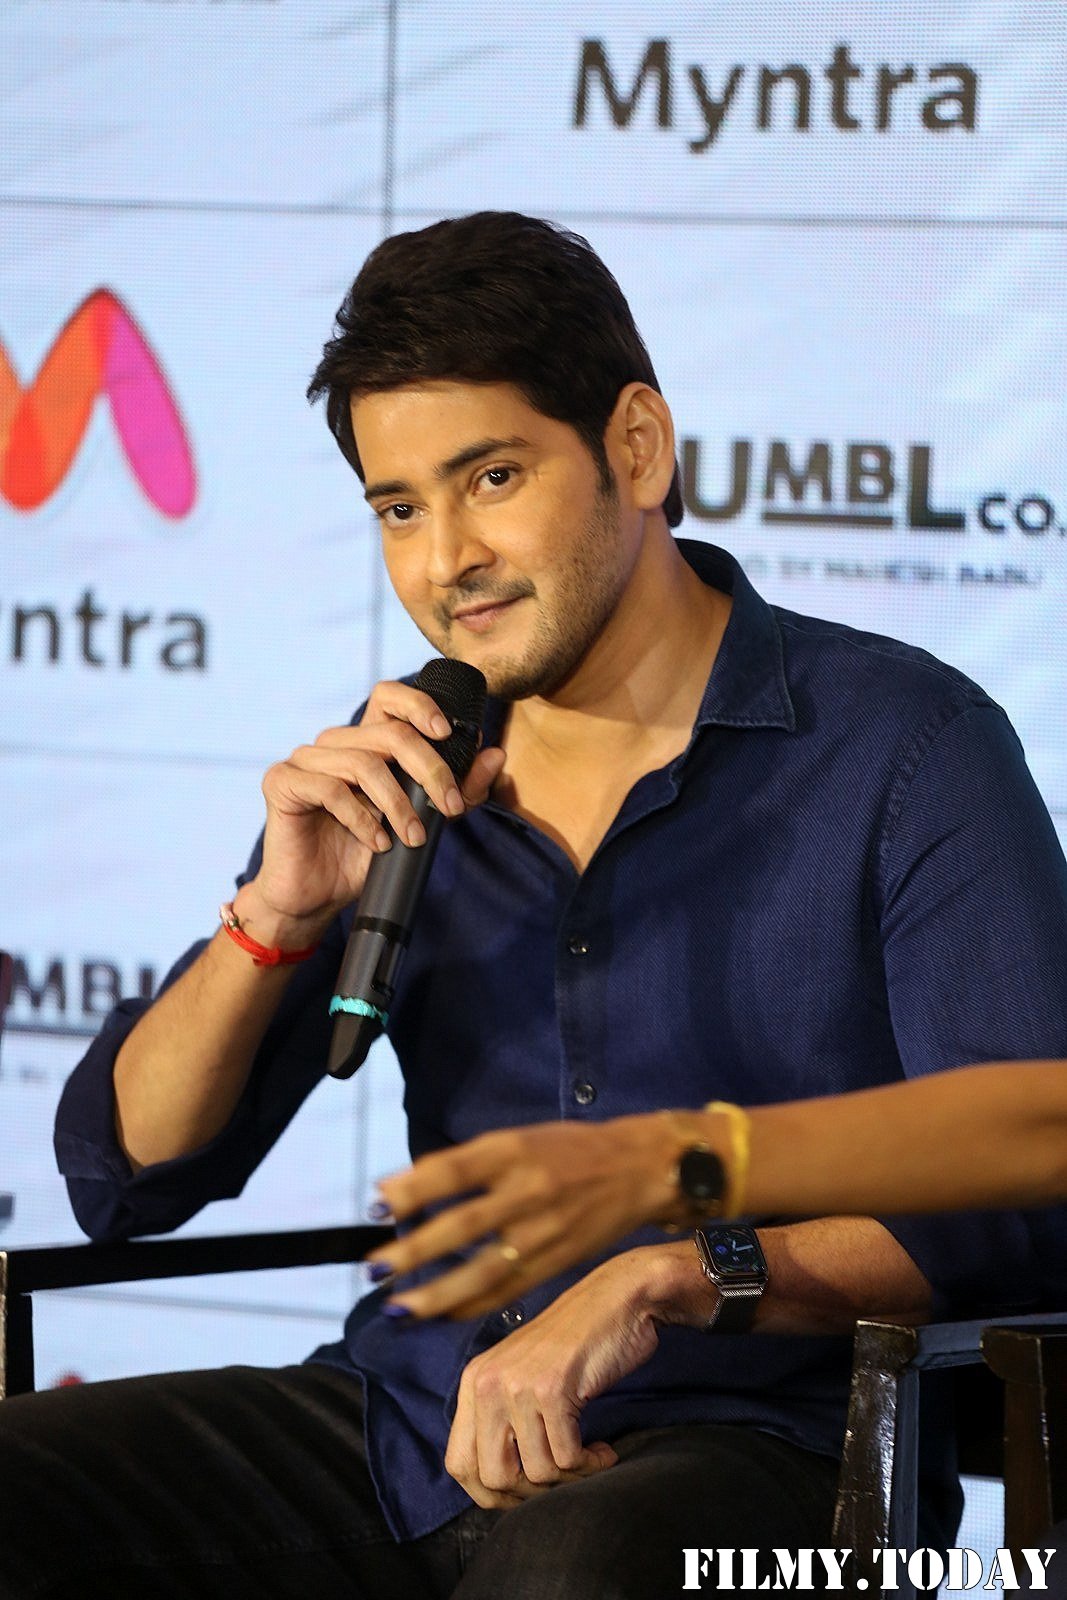 Mahesh Babu Launches His Apparel Brand The Humbl Co On Myntra Photos | Picture 1715417